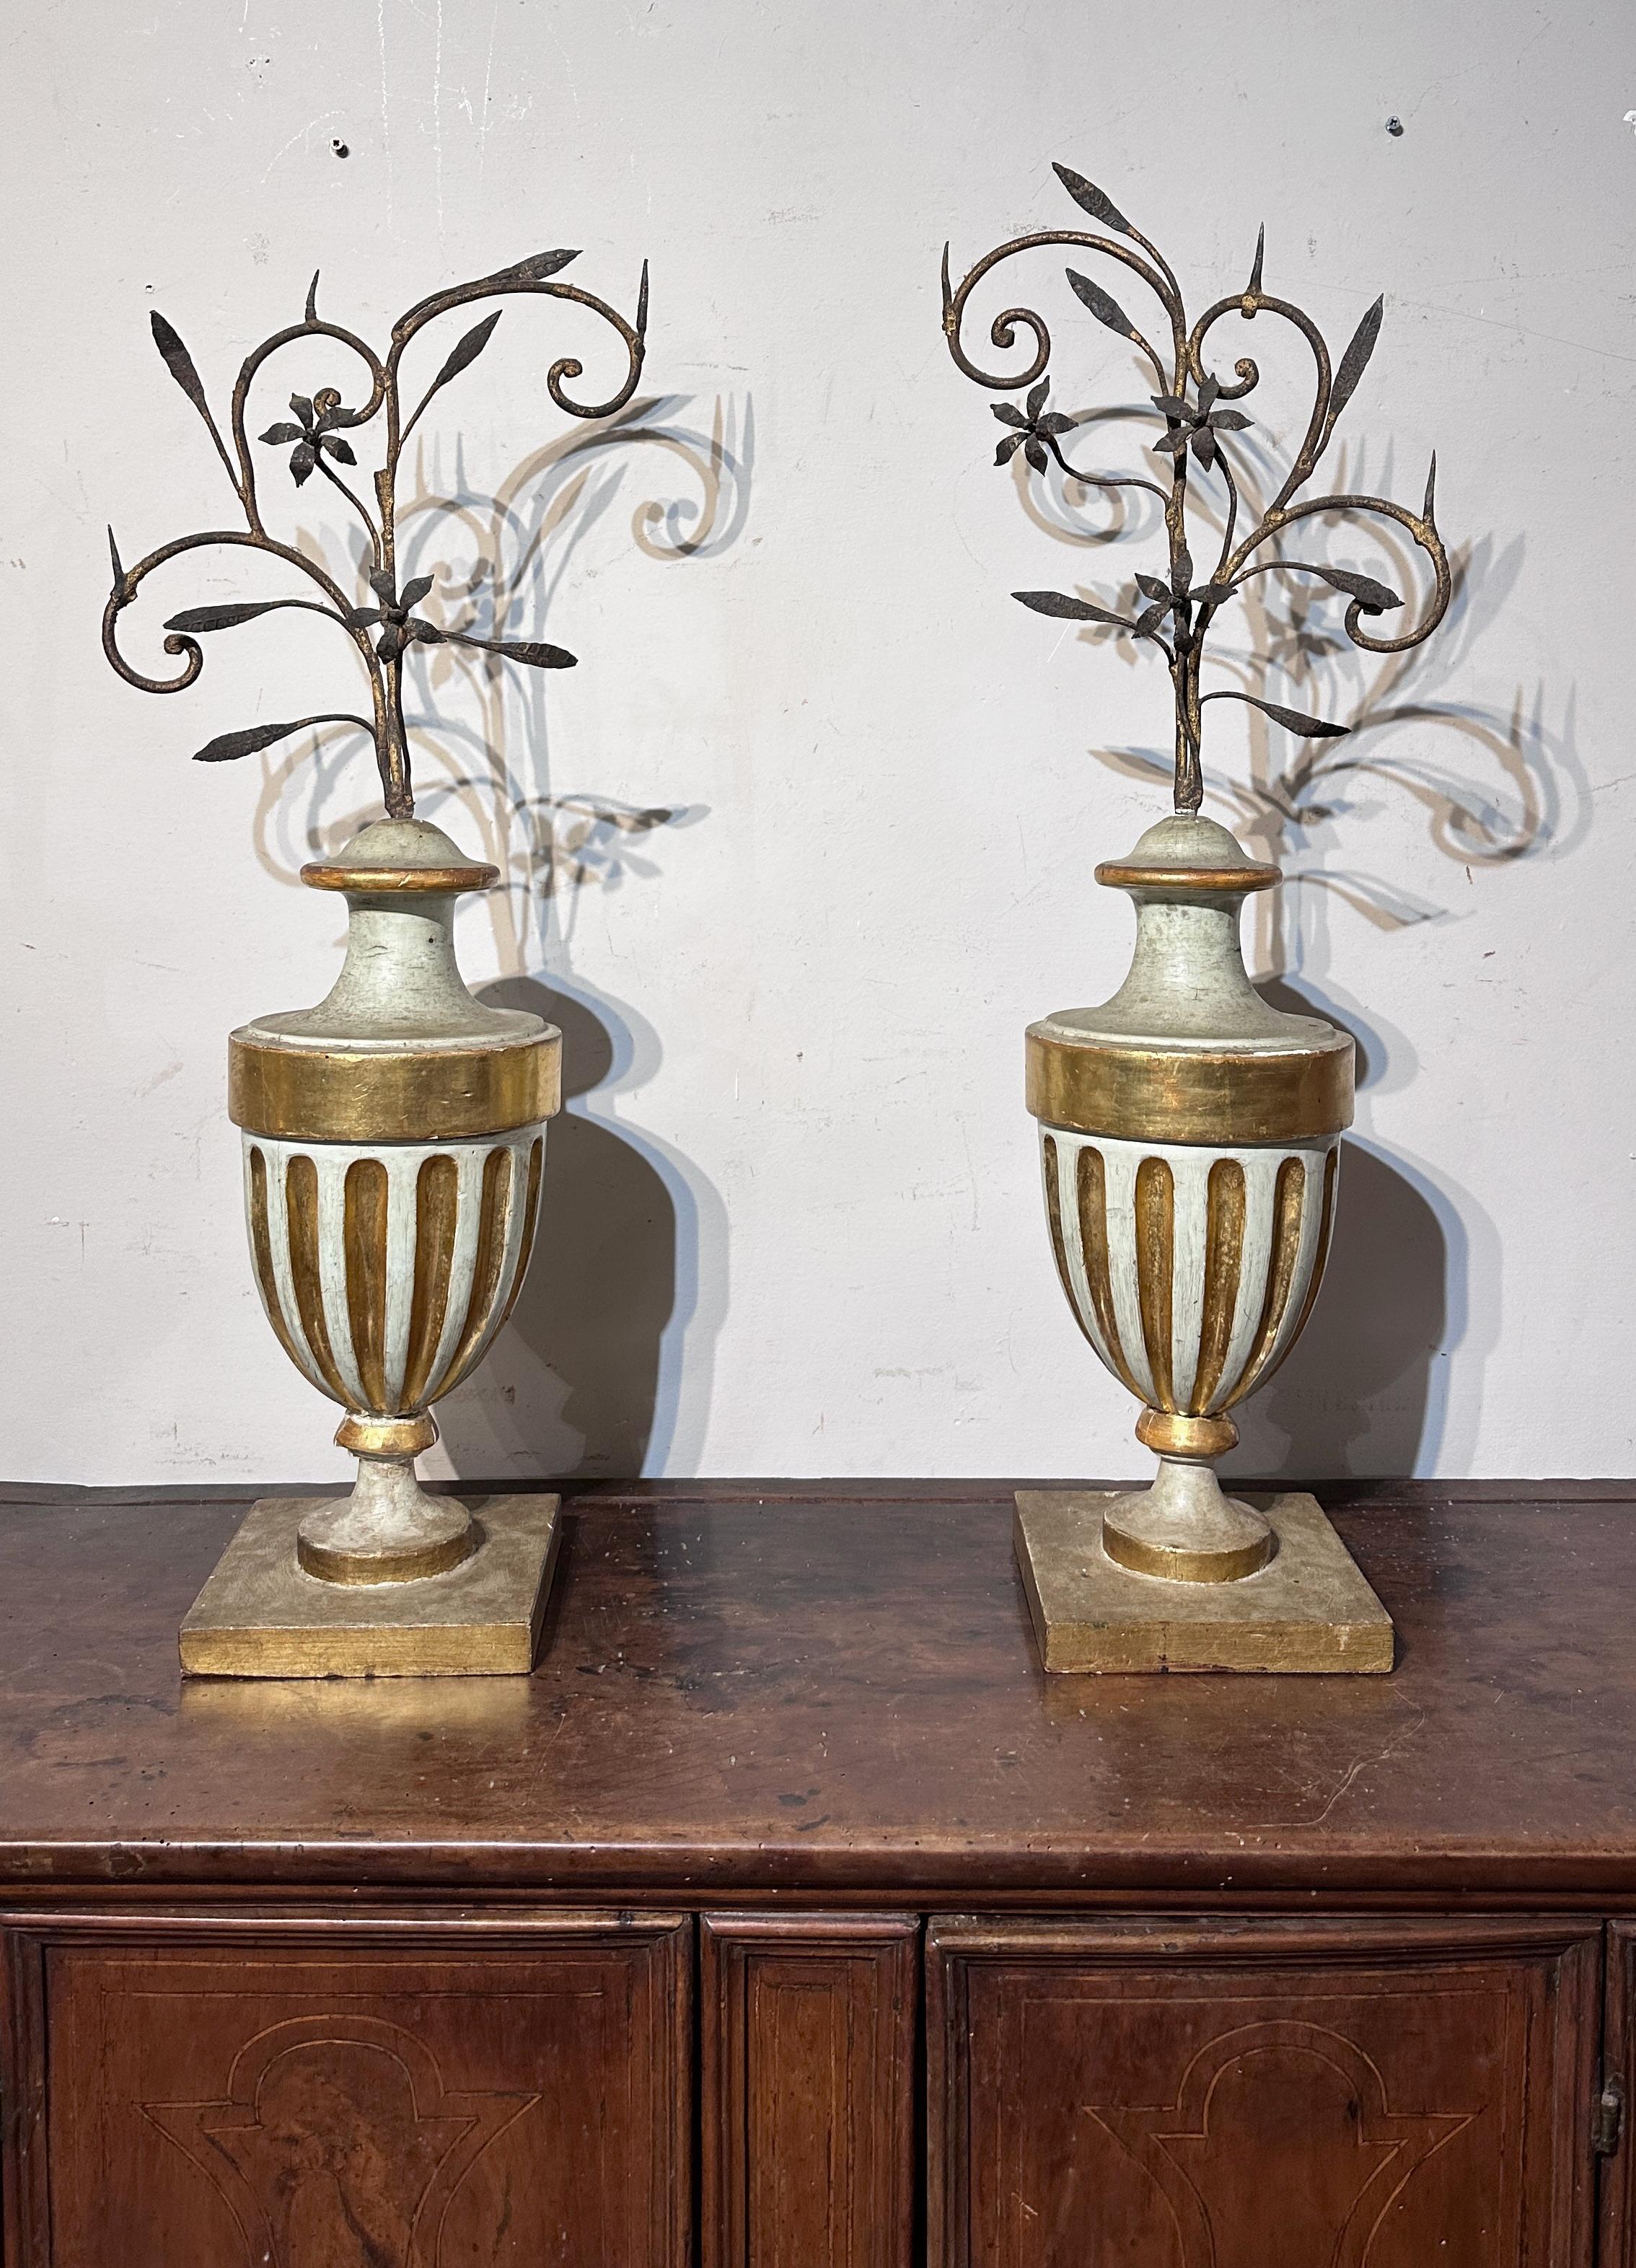 This pair of vase palm holders is ascribed to Tuscan manufacture from the neoclassical period (18th century). They are made of carved wood and painted with a lean tempera, which gives a sober and elegant appearance to the object. Furthermore, they